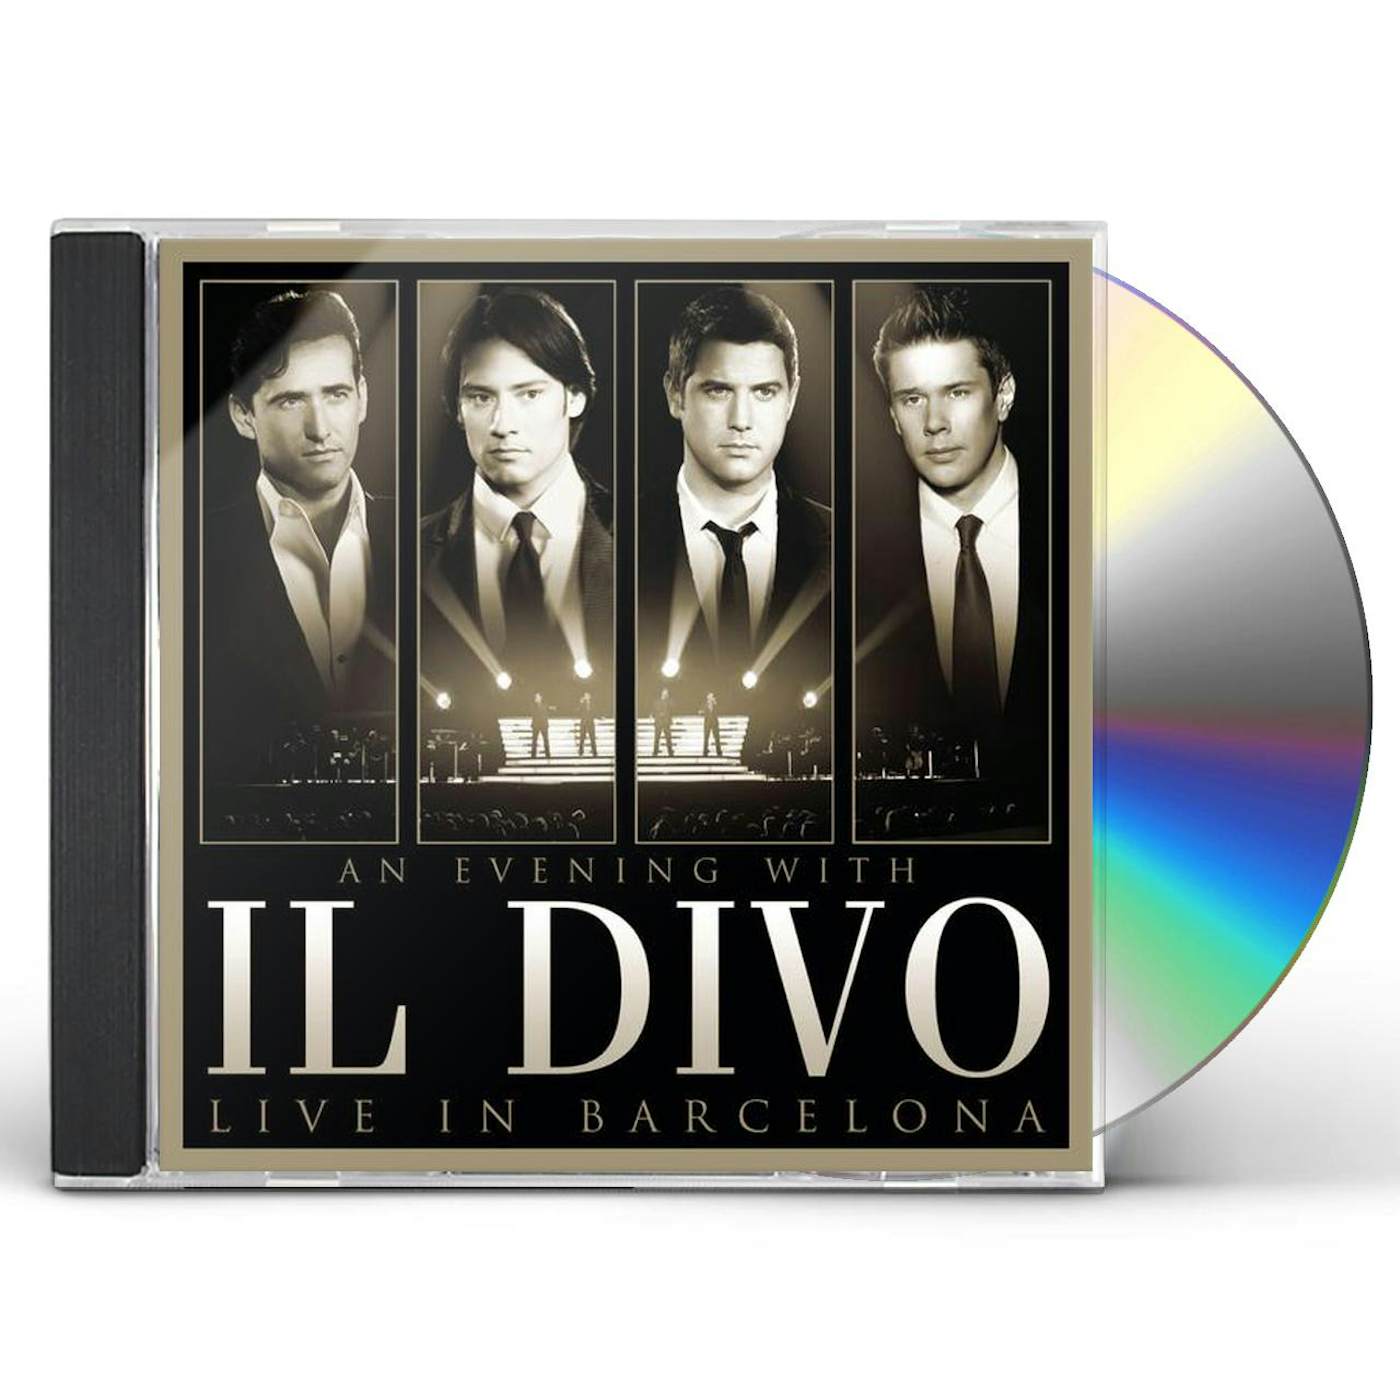 AN EVENING WITH IL DIVO: LIVE IN BARCELONA CD